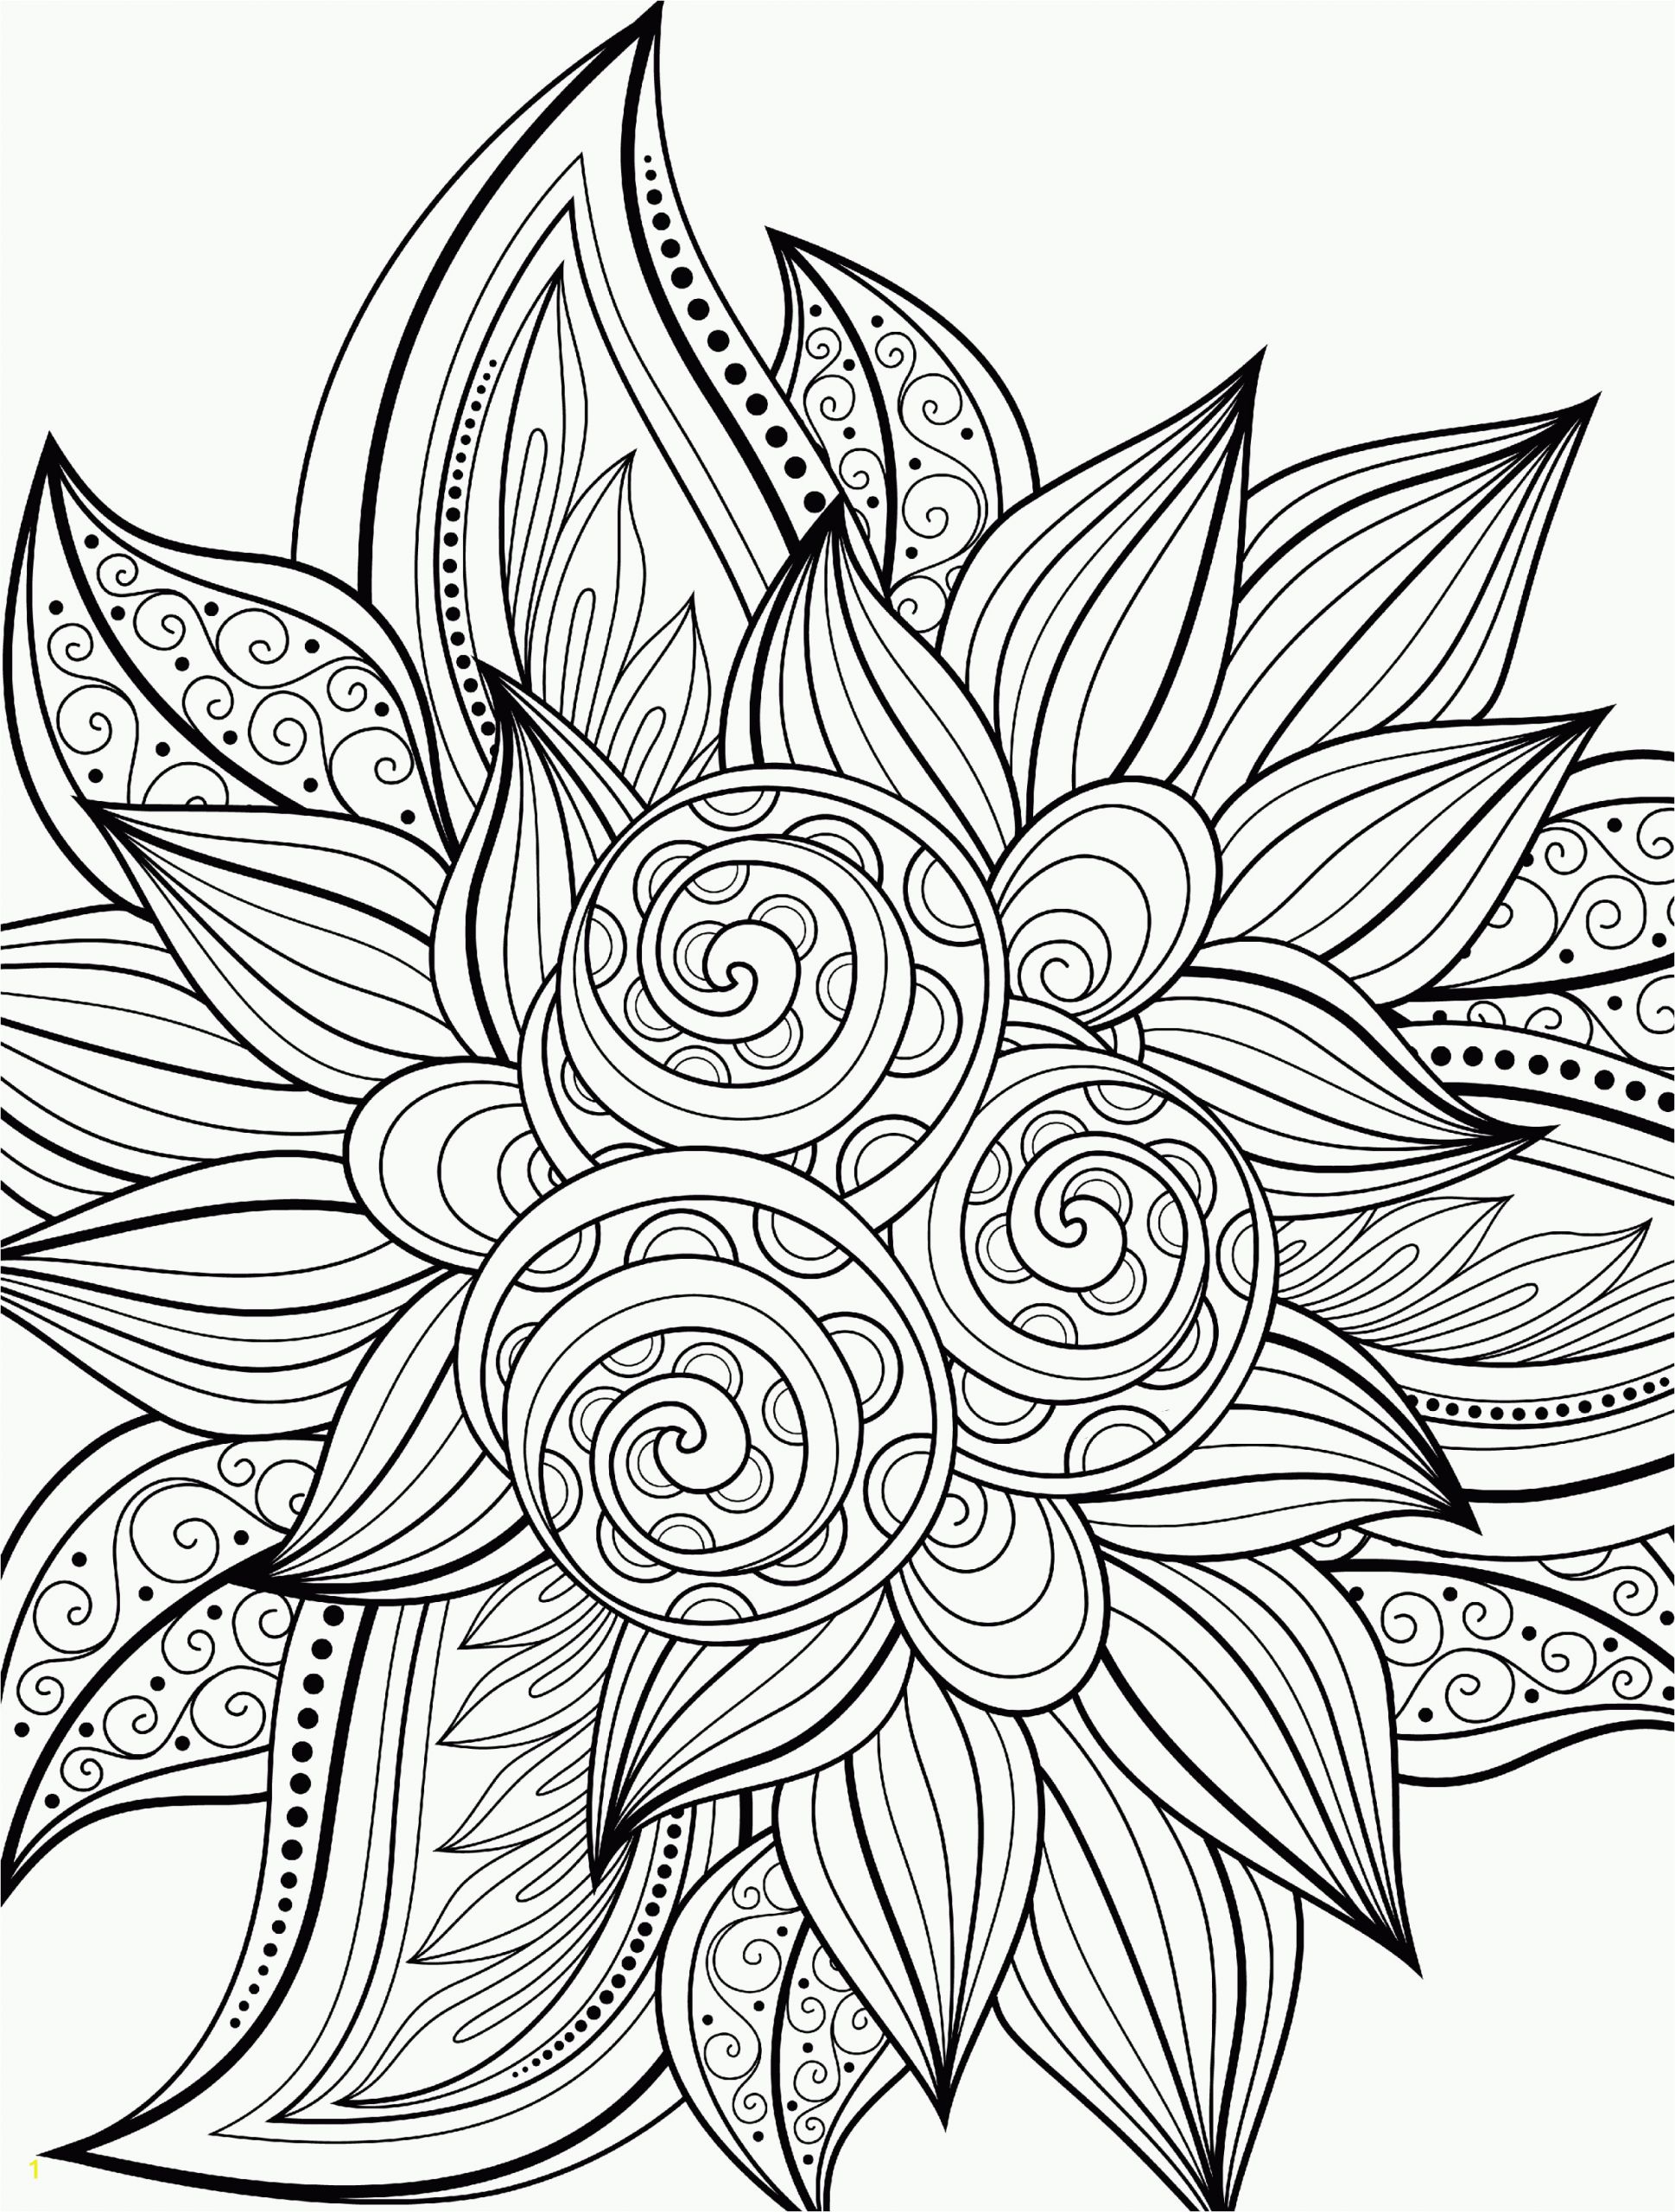 Free Printable Coloring Pages for Adults Only Pdf Free Printable Coloring Pages for Adults Ly Image 48 Art